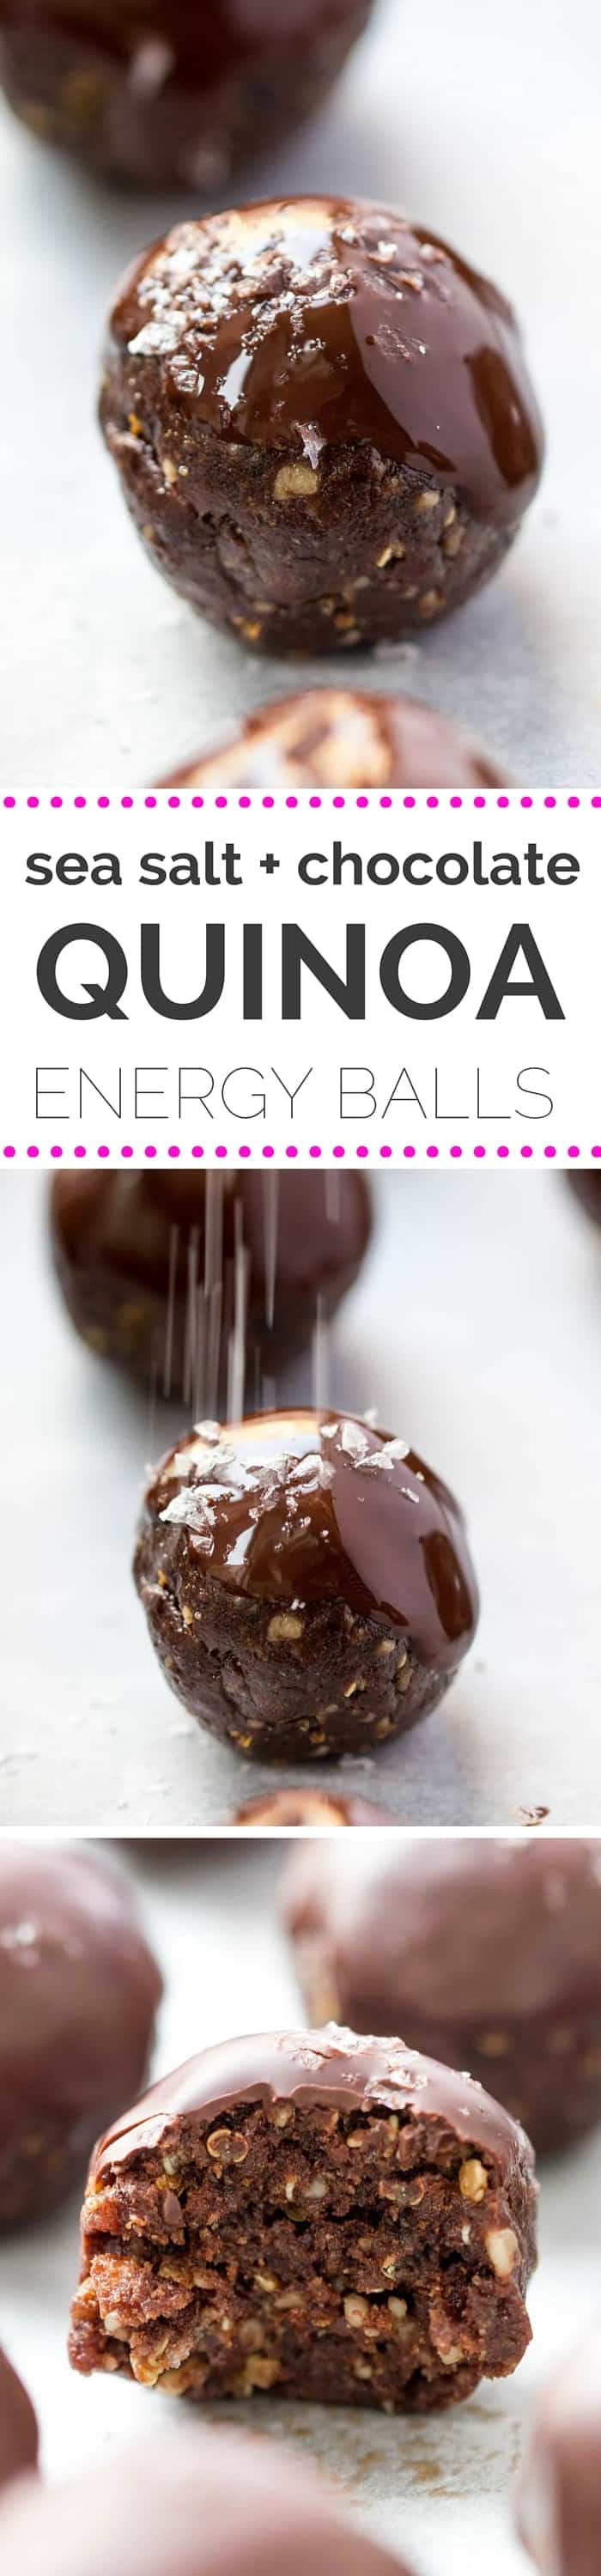 The BEST DAMN energy balls ever! They're double dark chocolate and sea salt with crispy quinoa -- taste like brownies, but are packed with healthy ingredients! [vegan]